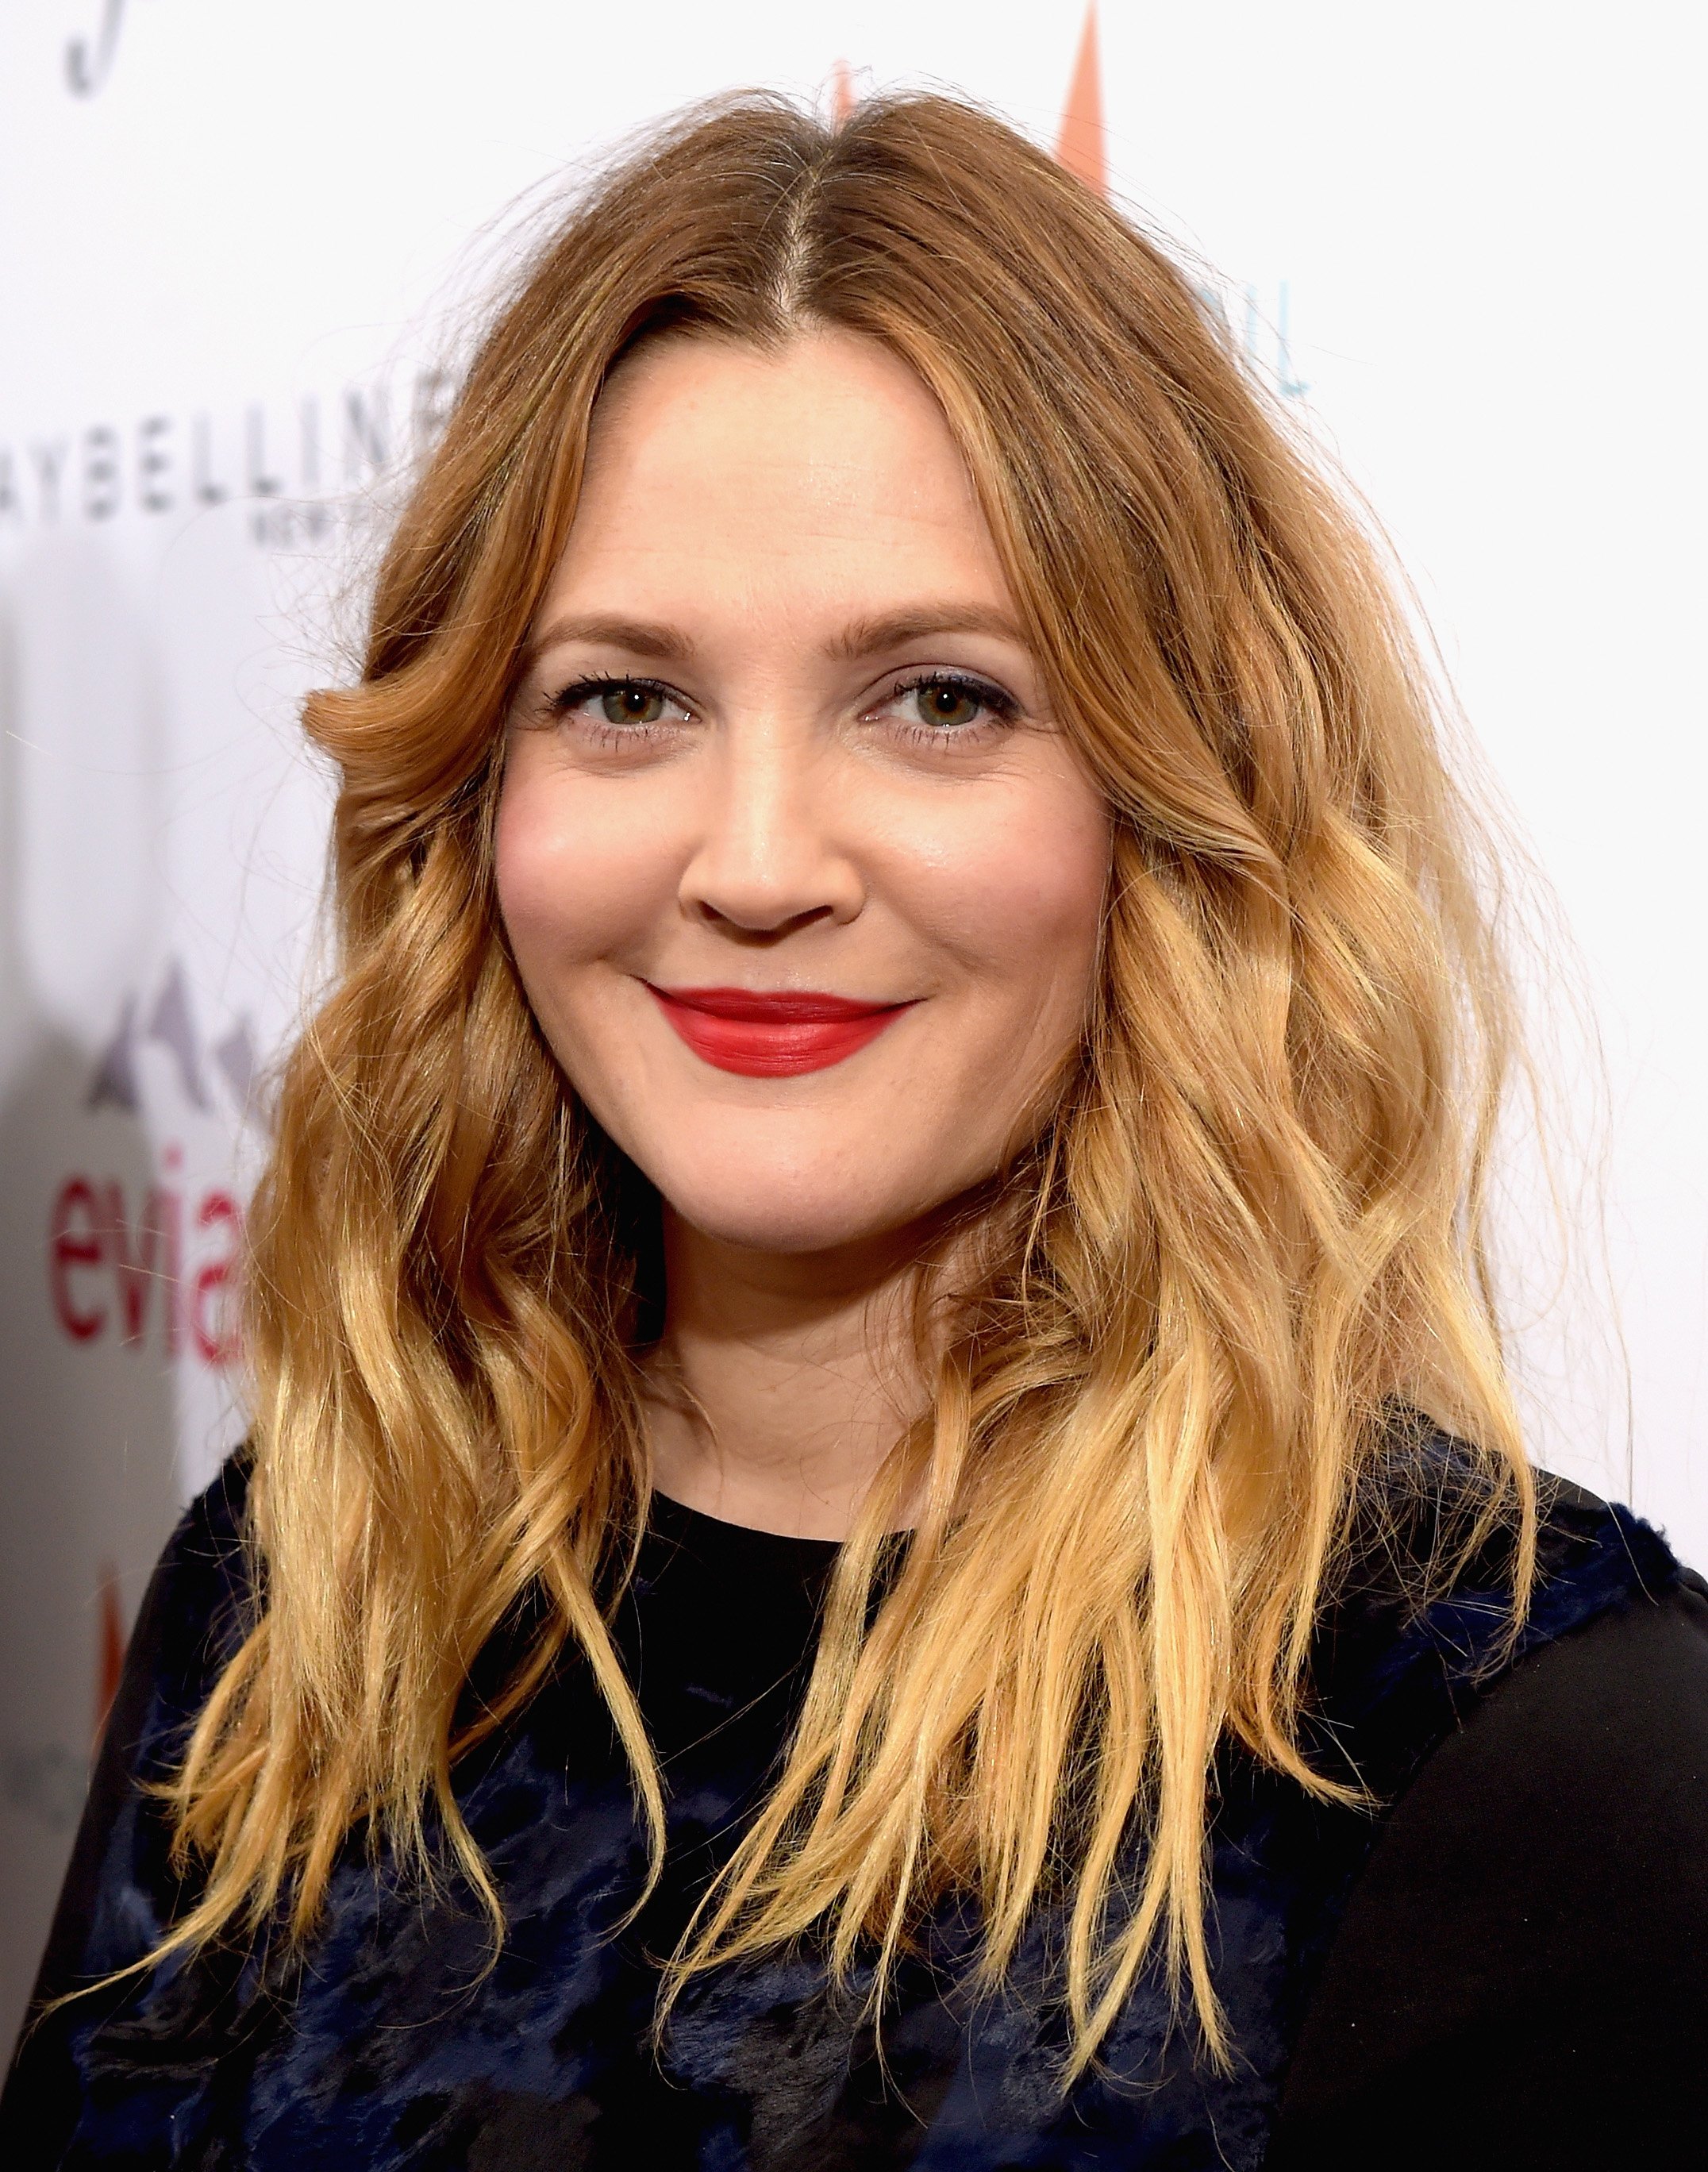 Drew Barrymore Showcases Her Beach Body In Bright Yellow Swimsuit After 20 Pound Weight Loss